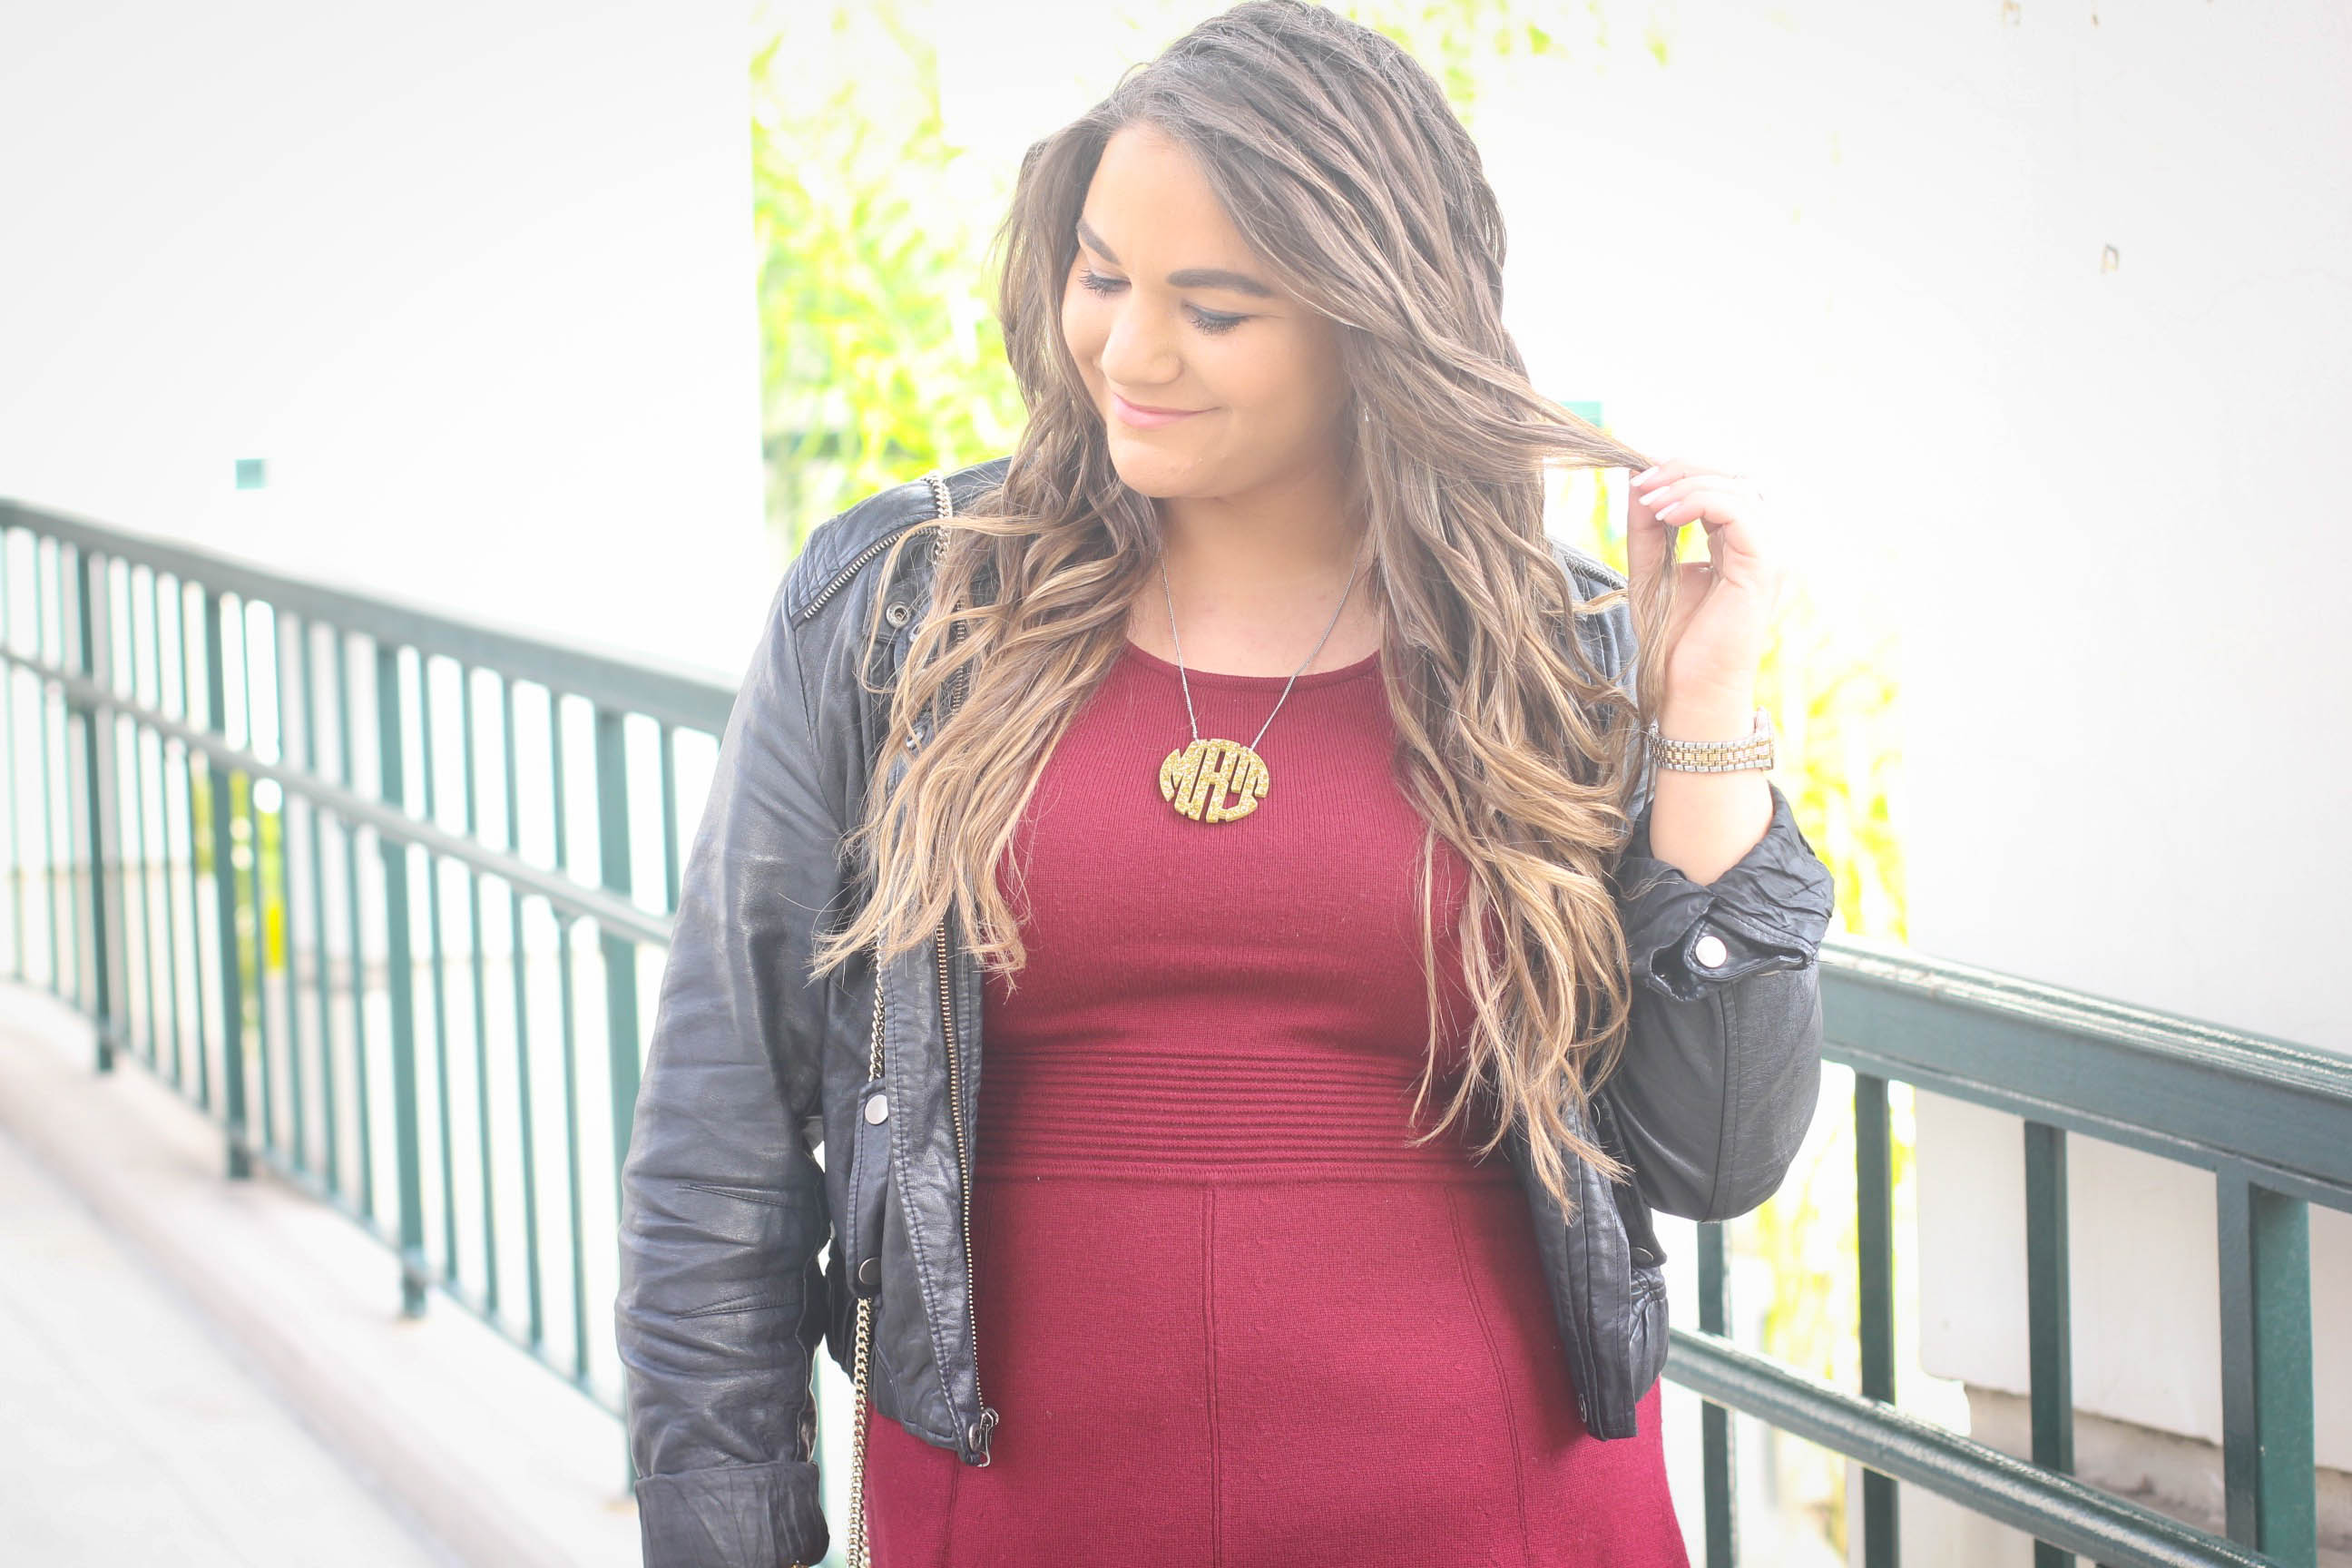 missyonmadison, sweater dress, how to style a sweater dress, how to style a moto jacket, moto jacket, maroon dress, maroon sweater dress, caged heels, nude gladiator heels, gold crossbody bag, gold bag, mezzanotte bag, nude heels, nude caged heels, holiday dress guide, what to wear for the holidays, christmas outfit ideas, melissa tierney, sweater dress,